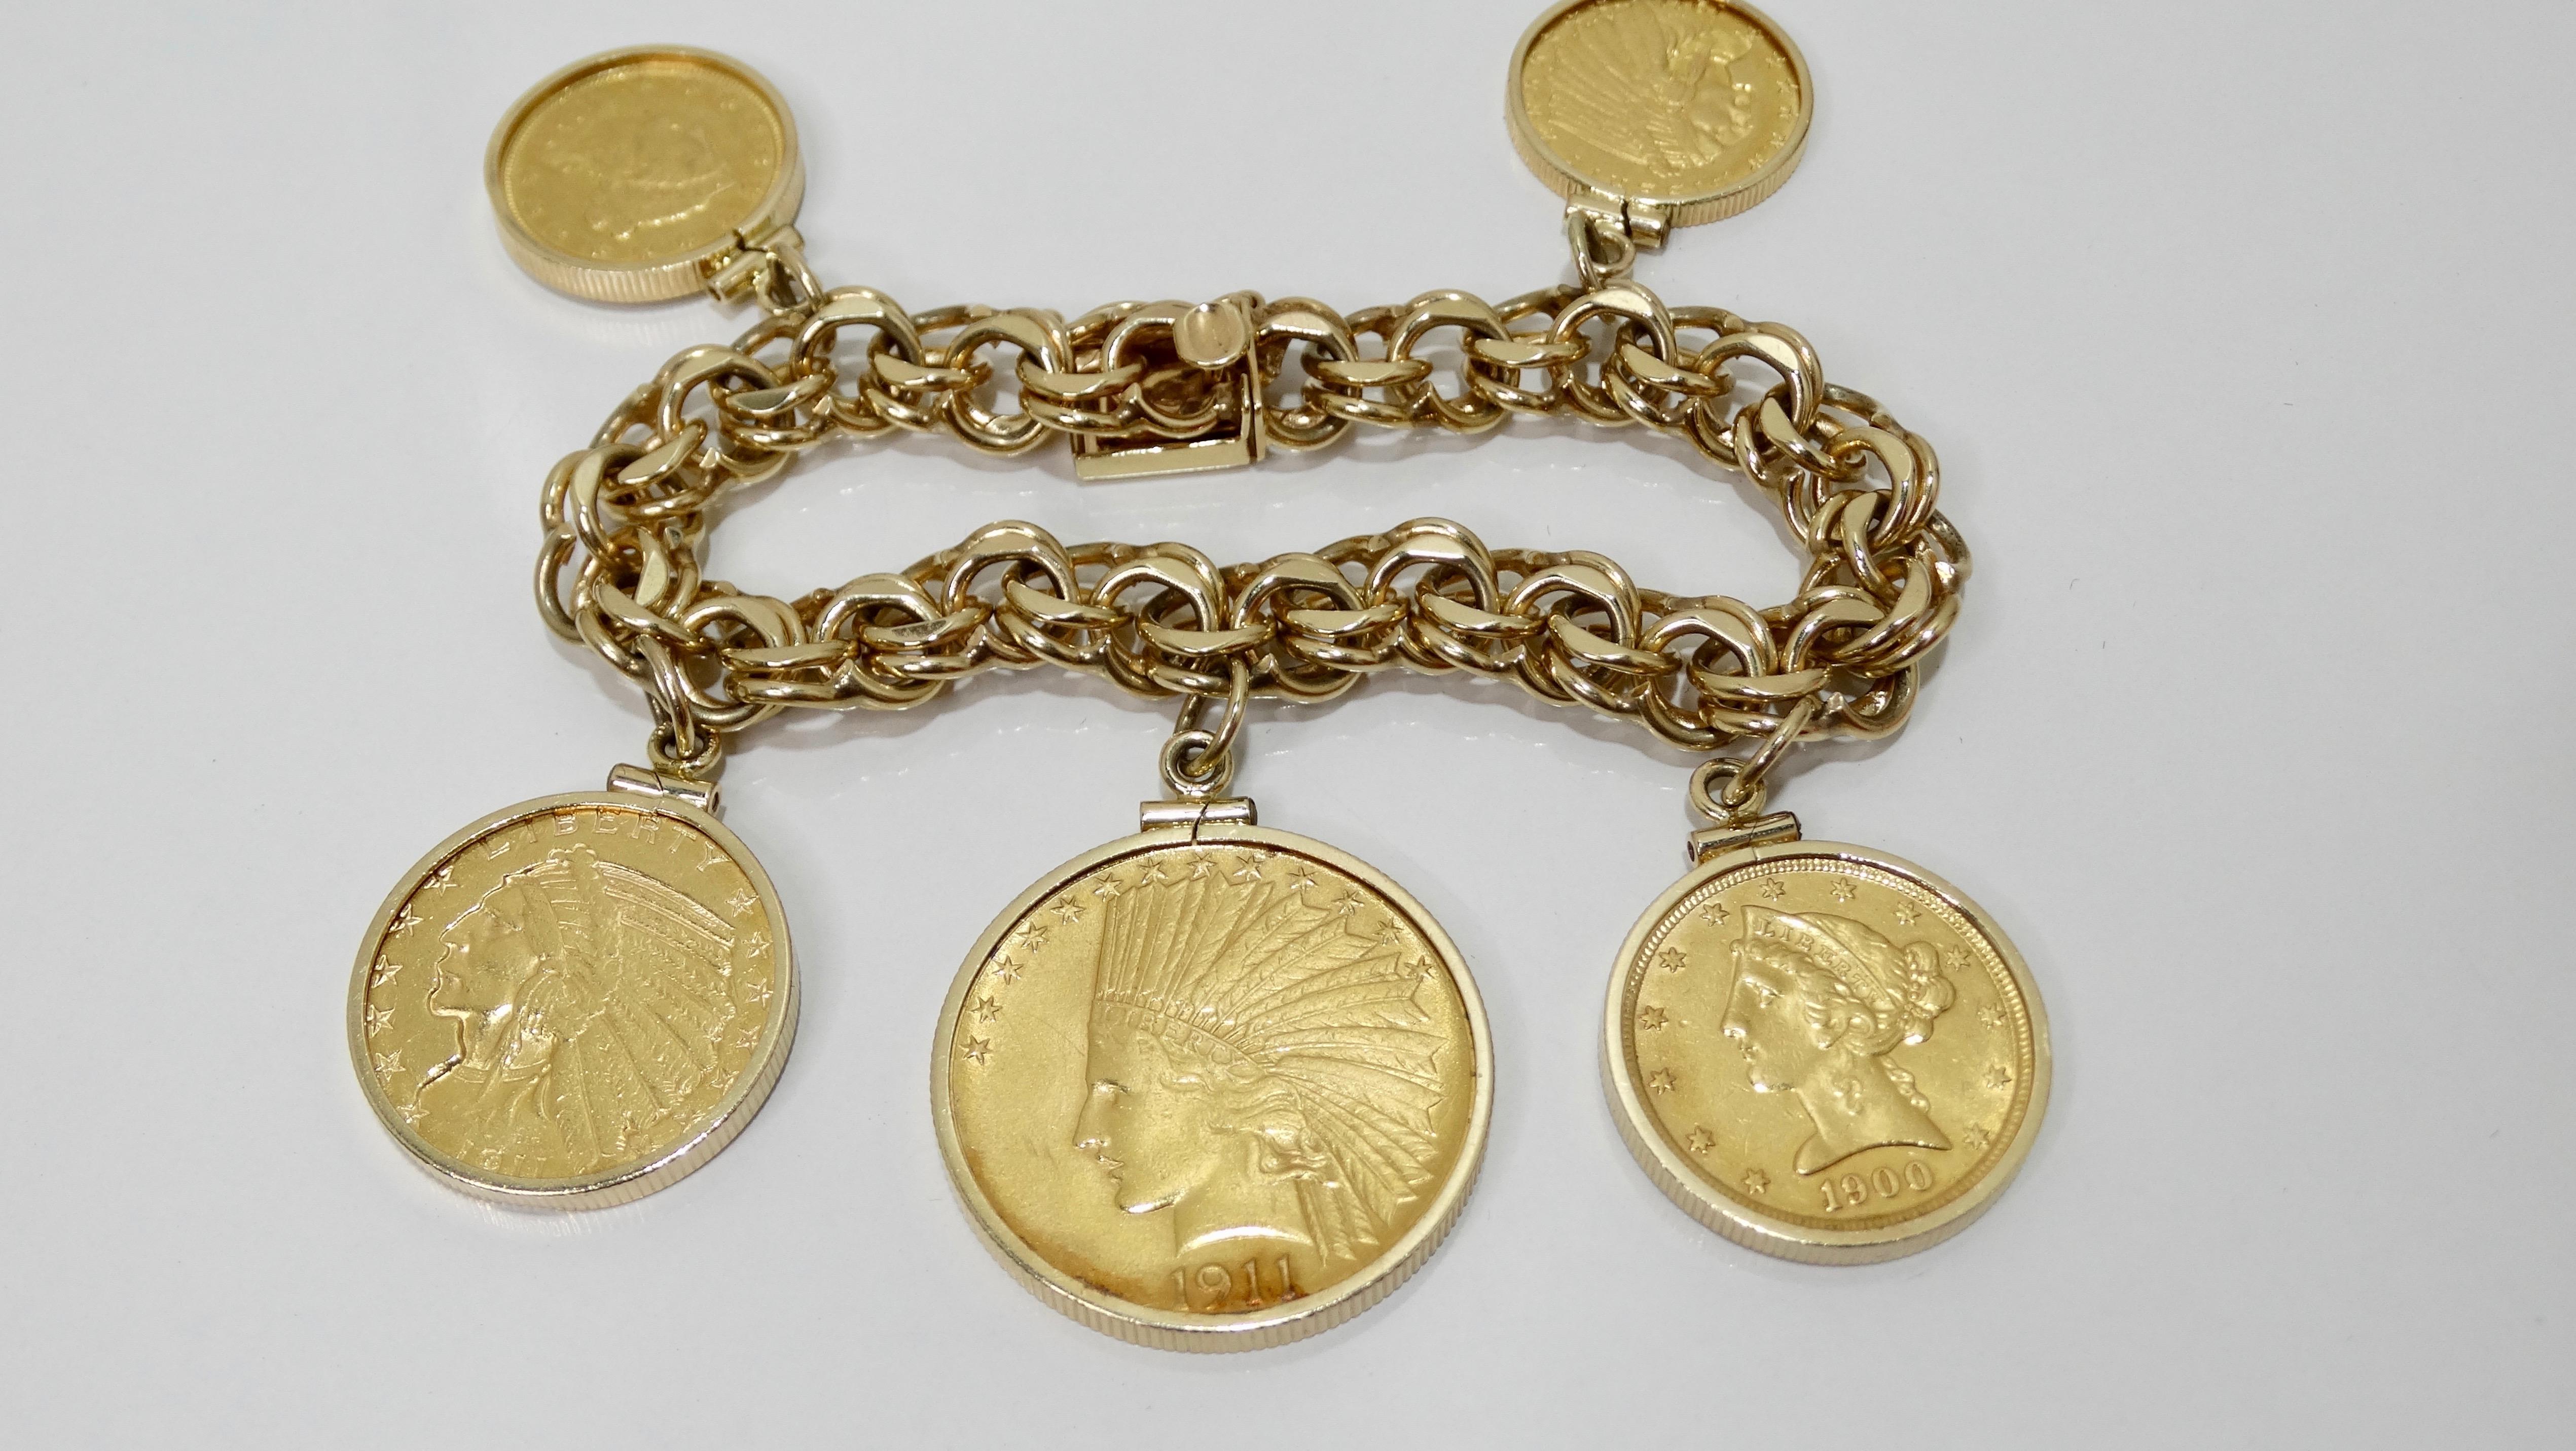 Complete your vintage jewelry collection with this amazing vintage coin charm bracelet! Circa mid 20th century, this bracelet features a 14k gold overlapping double link chain with a box clasp closure. Hanging off the bracelet is a variety of pure